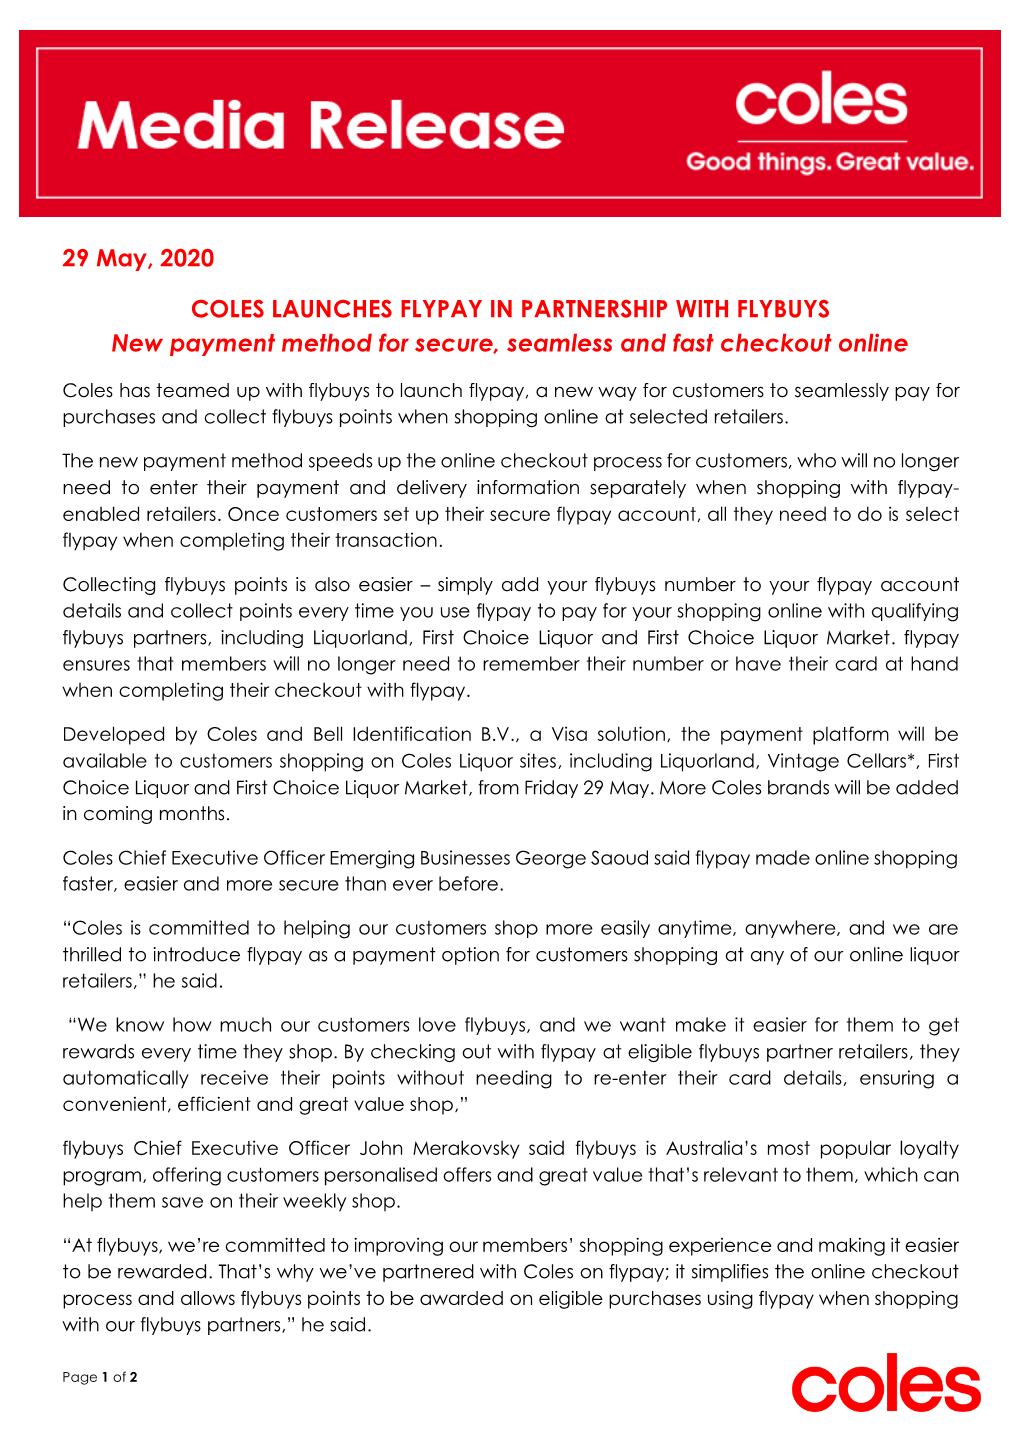 29 May, 2020 COLES LAUNCHES FLYPAY in PARTNERSHIP WITH